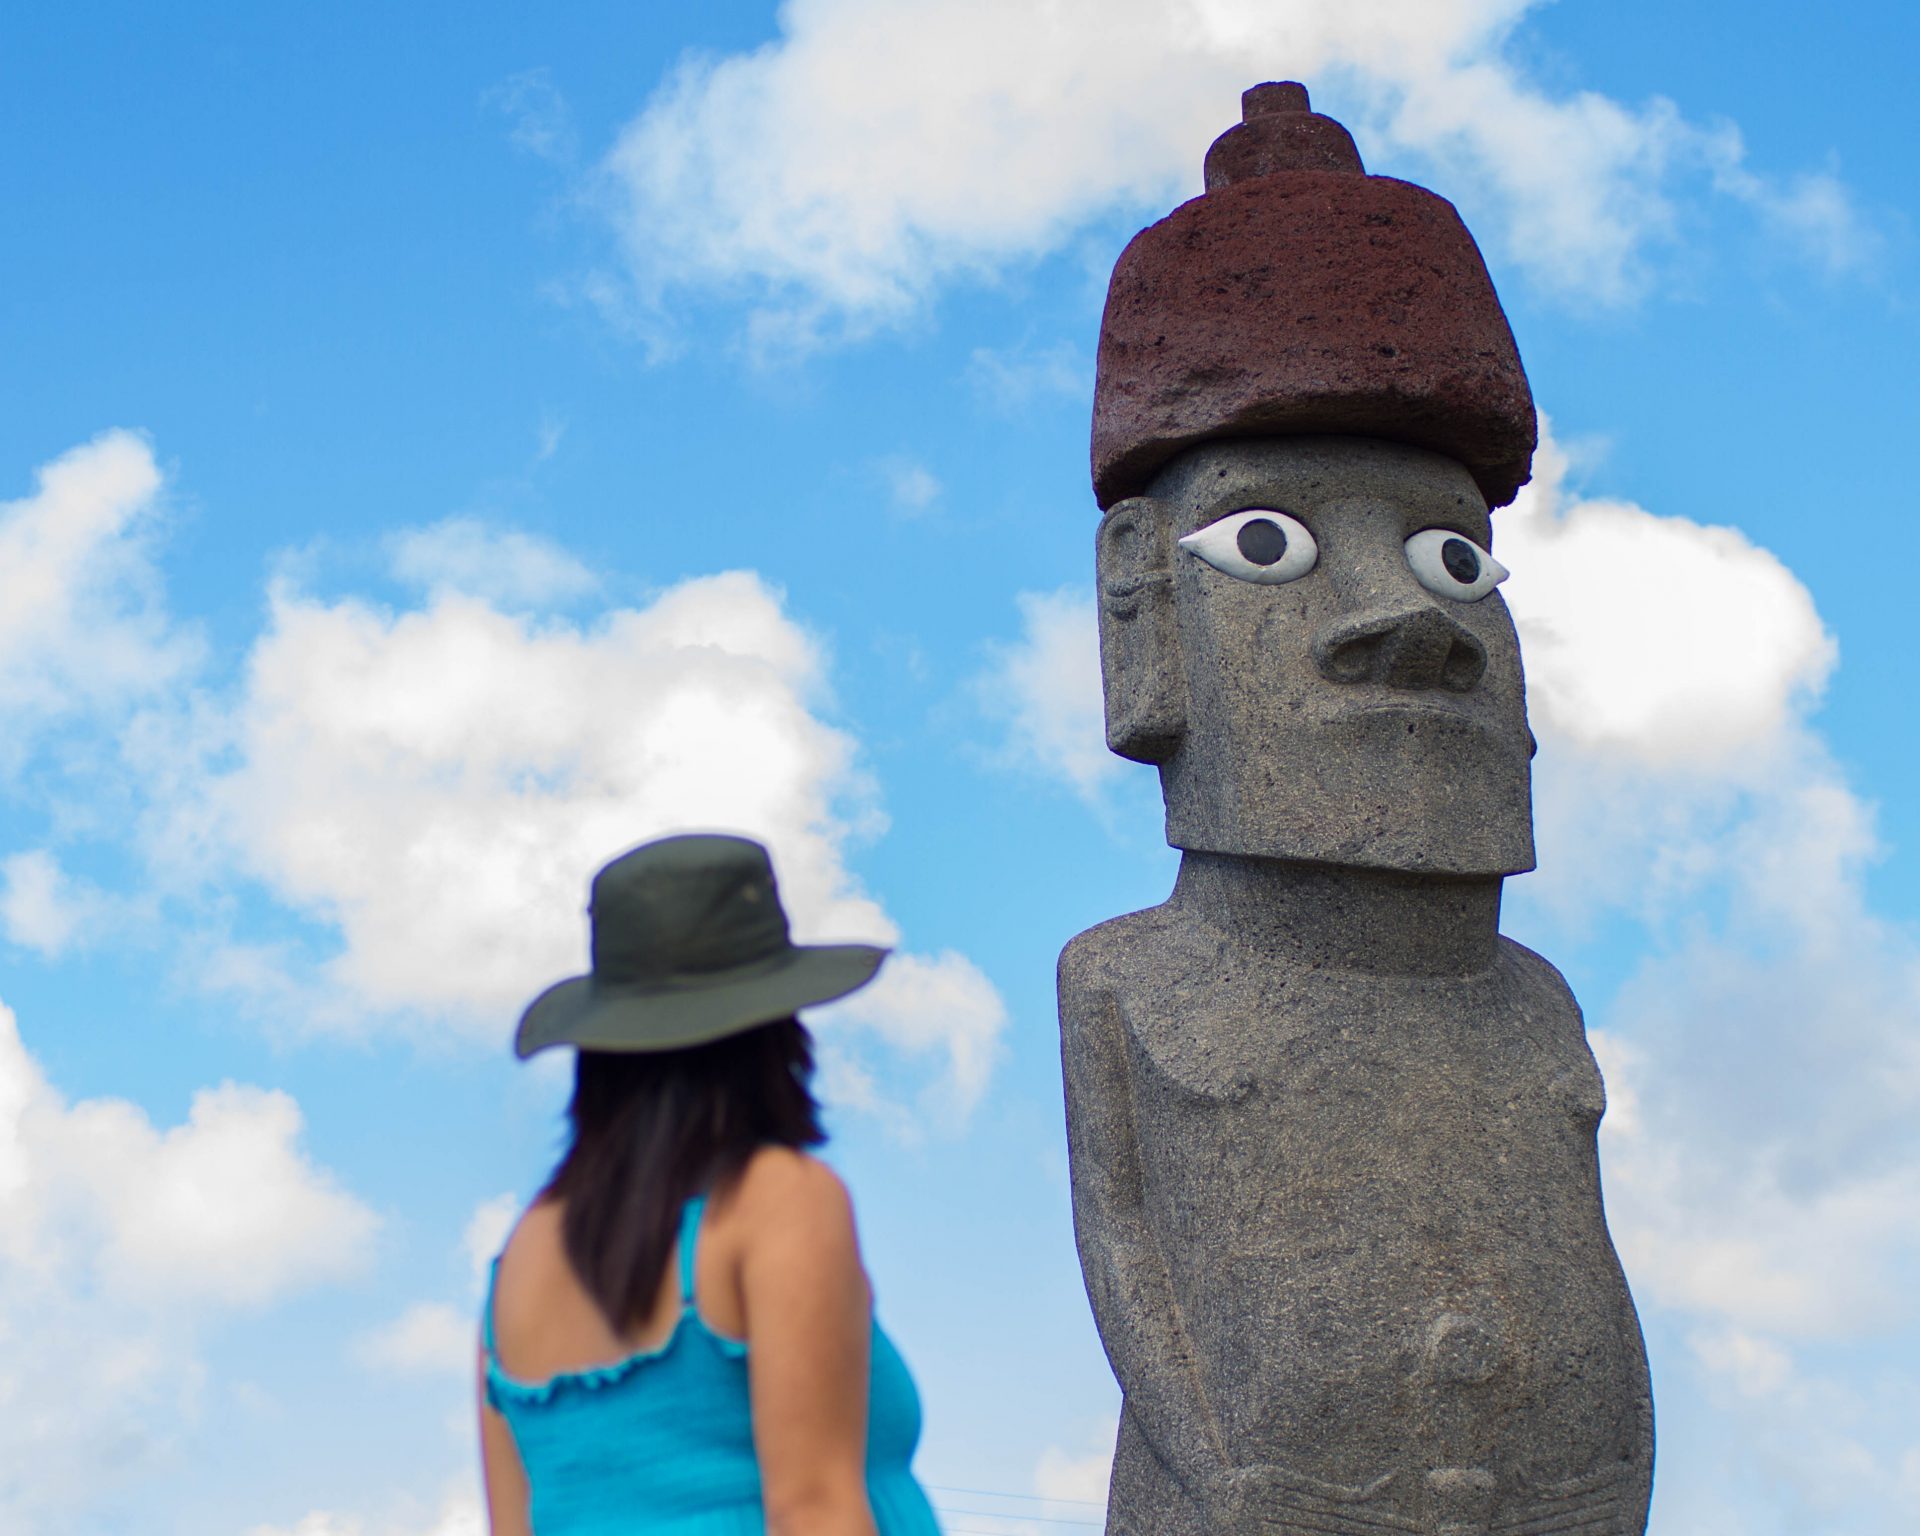 Woman wearing a green hat and blue shirt looks up at a completed replica sculpture of a moai backed with a blue sky on Easter Island